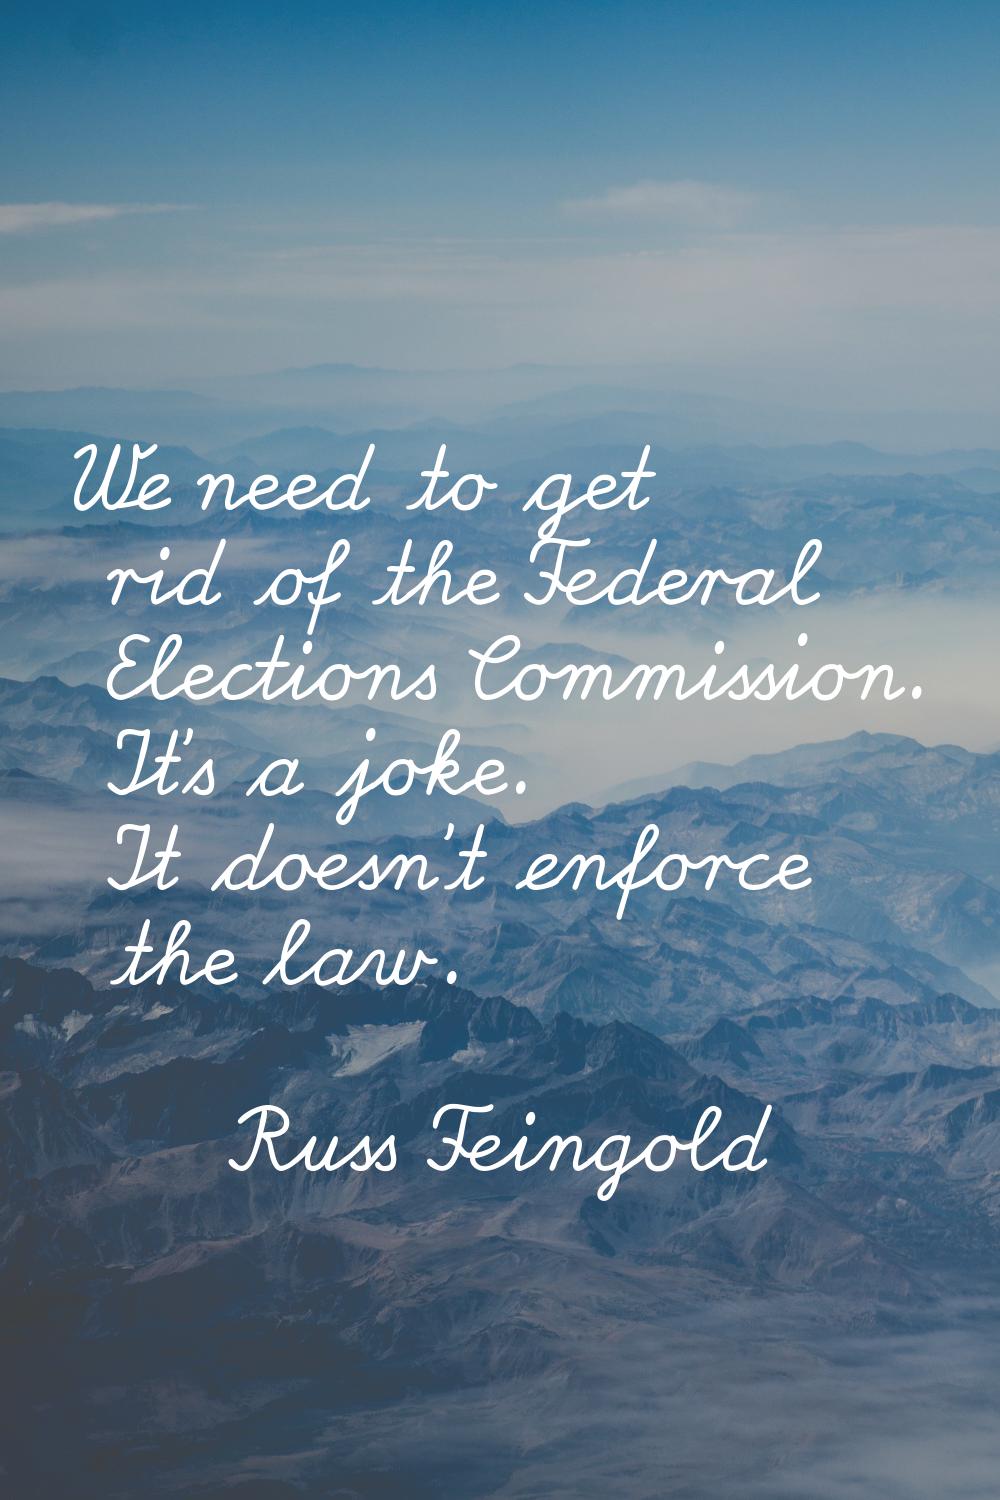 We need to get rid of the Federal Elections Commission. It's a joke. It doesn't enforce the law.